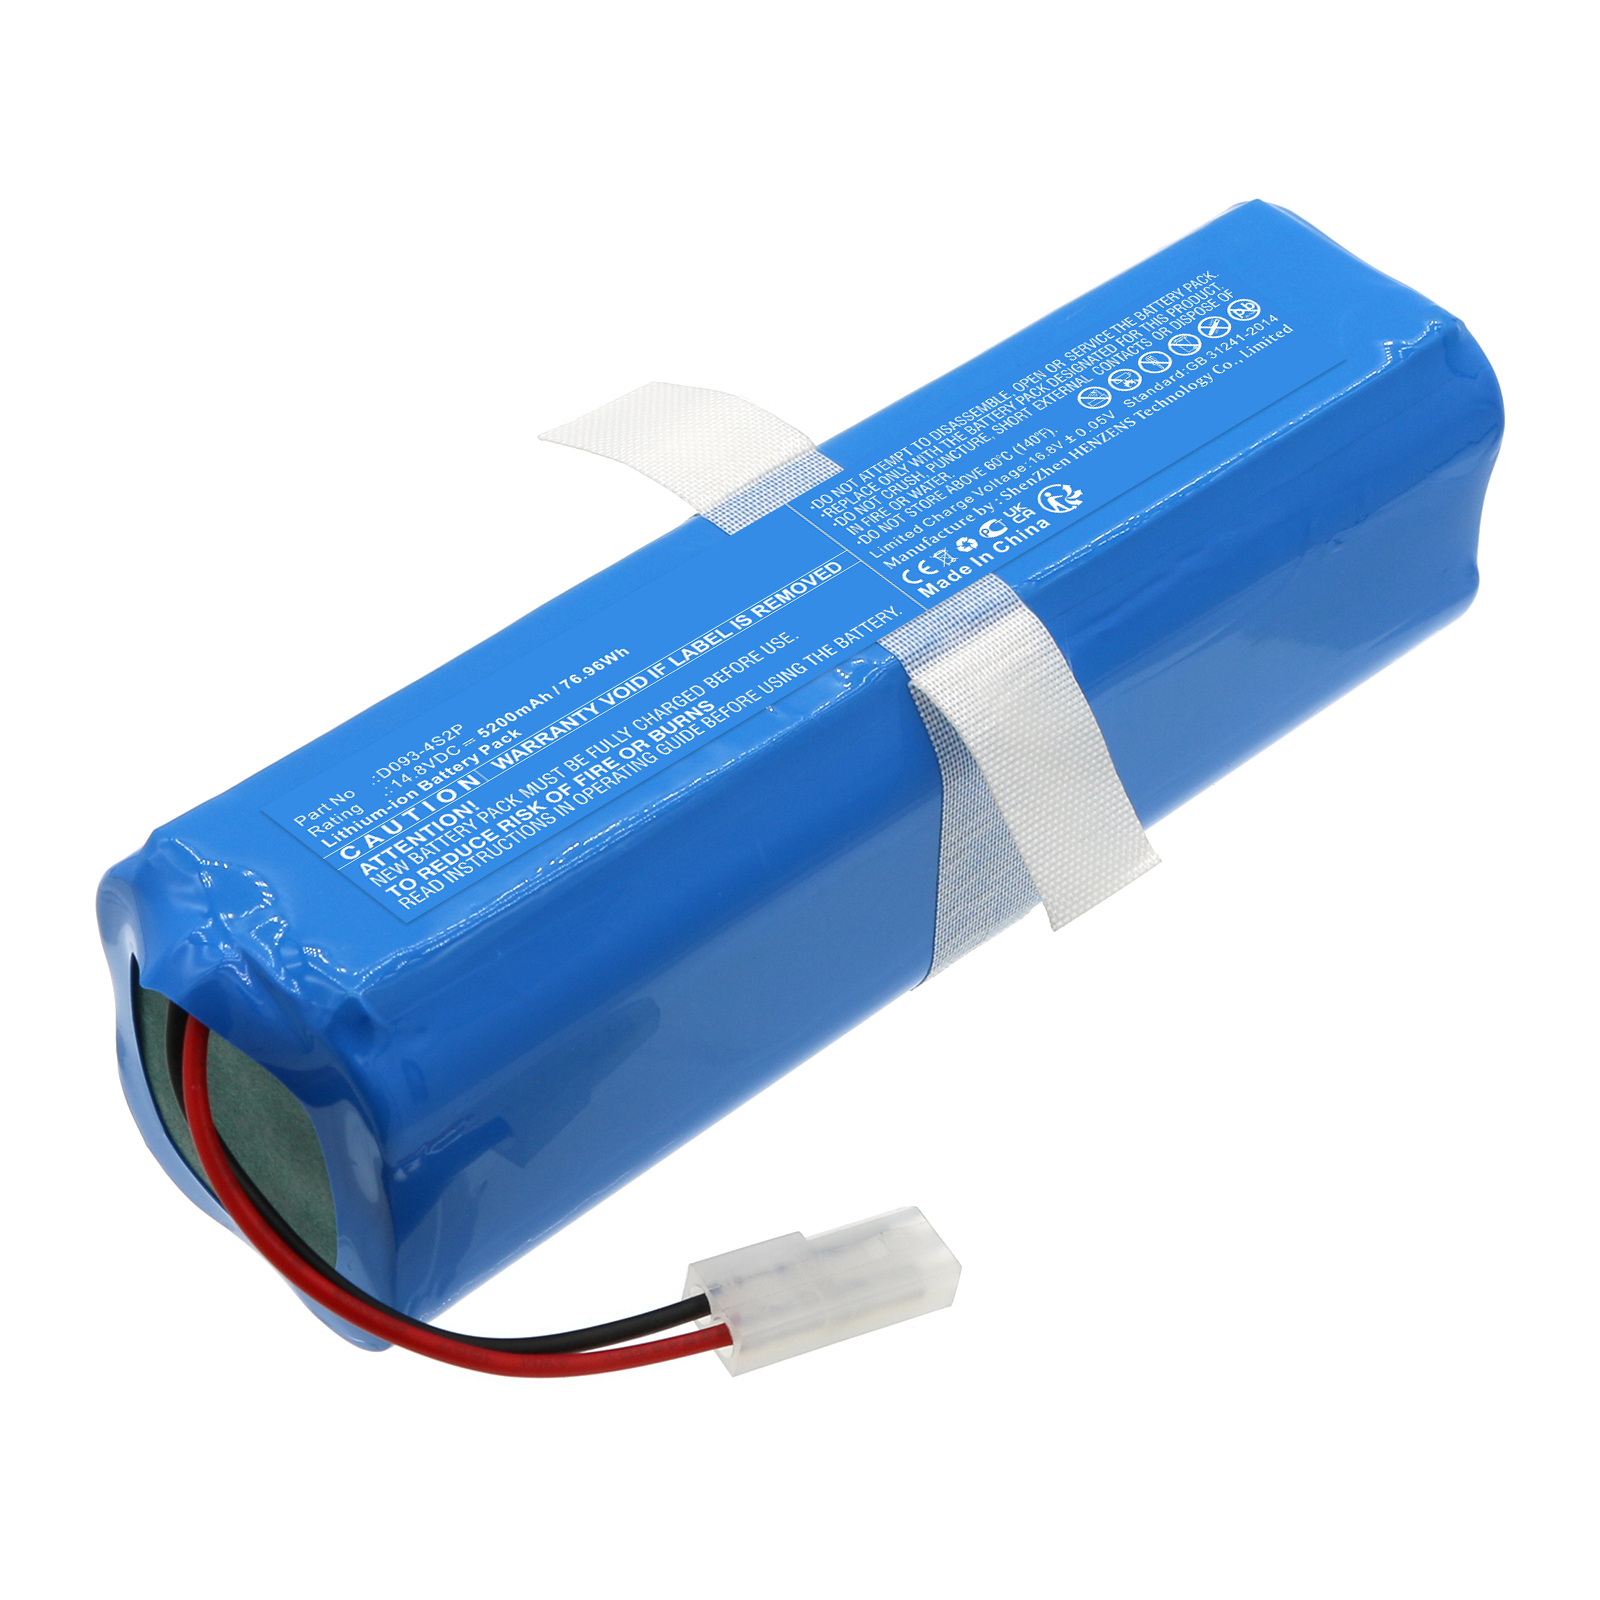 Batteries for ROEMOVacuum Cleaner